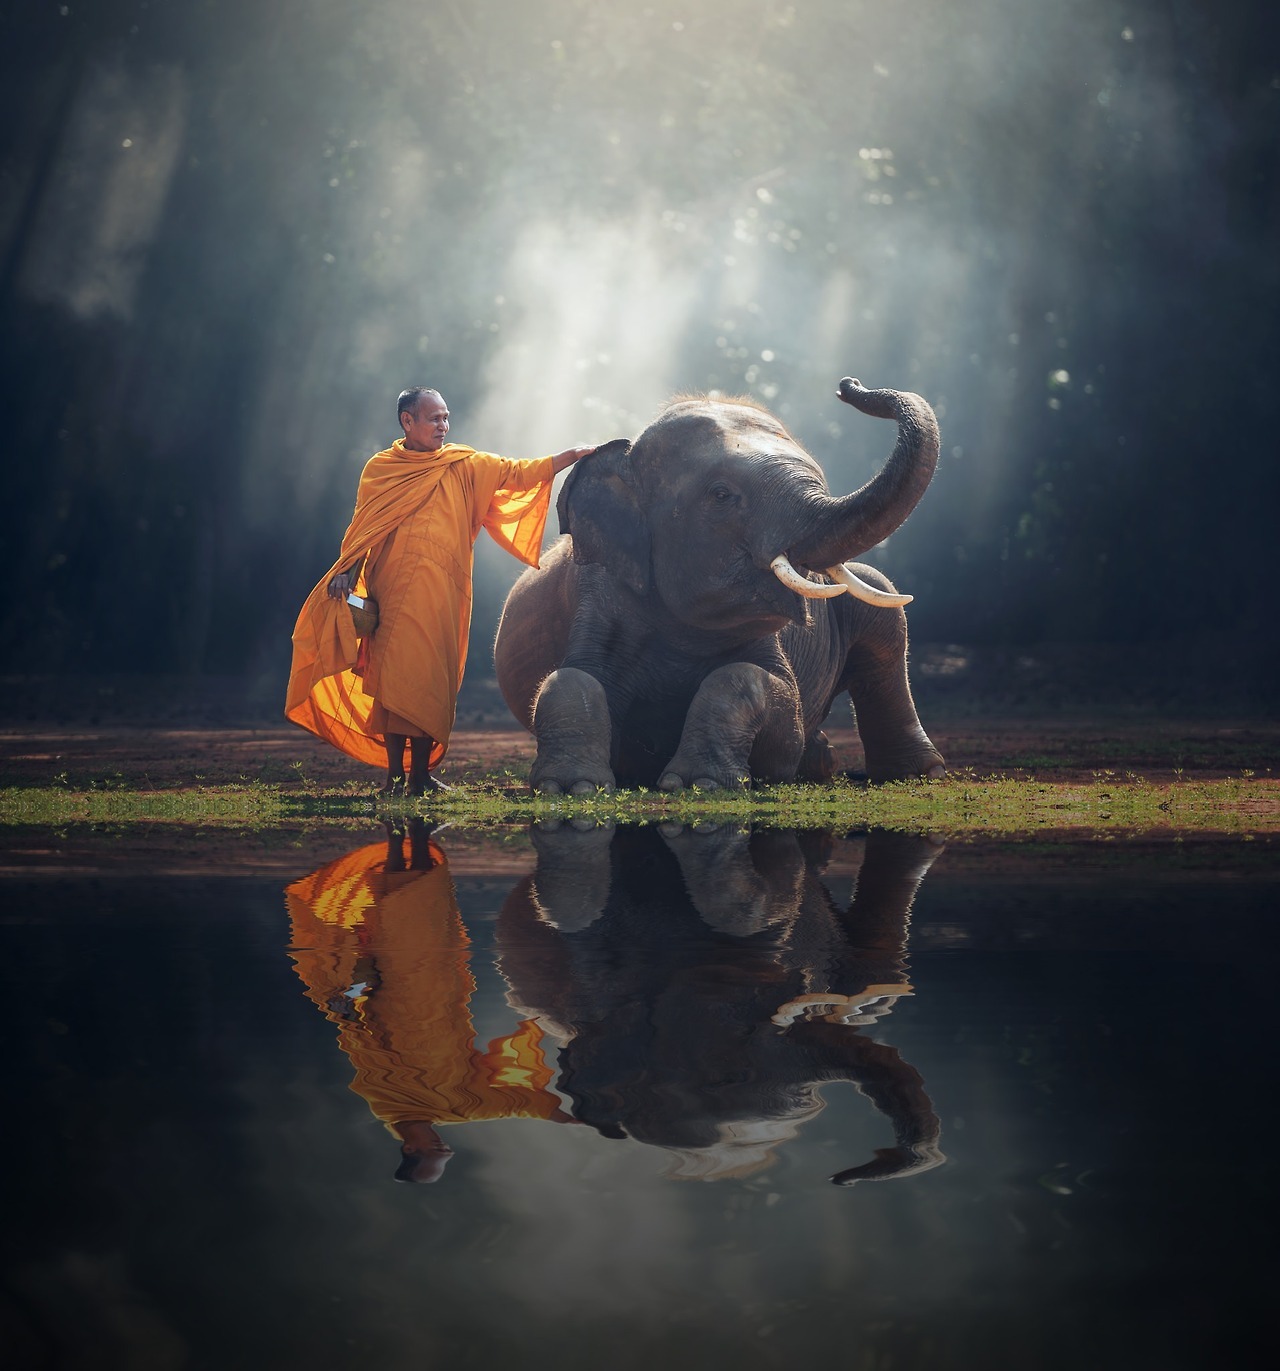 der-schwartzenmann:
â€œ sixpenceee:
â€œA monk and his elephant. Here is the source. Credit to the photographer, Sasin Tipchai, who took this on Oct 24, 2015.
â€
This is truly a blessed image.
â€